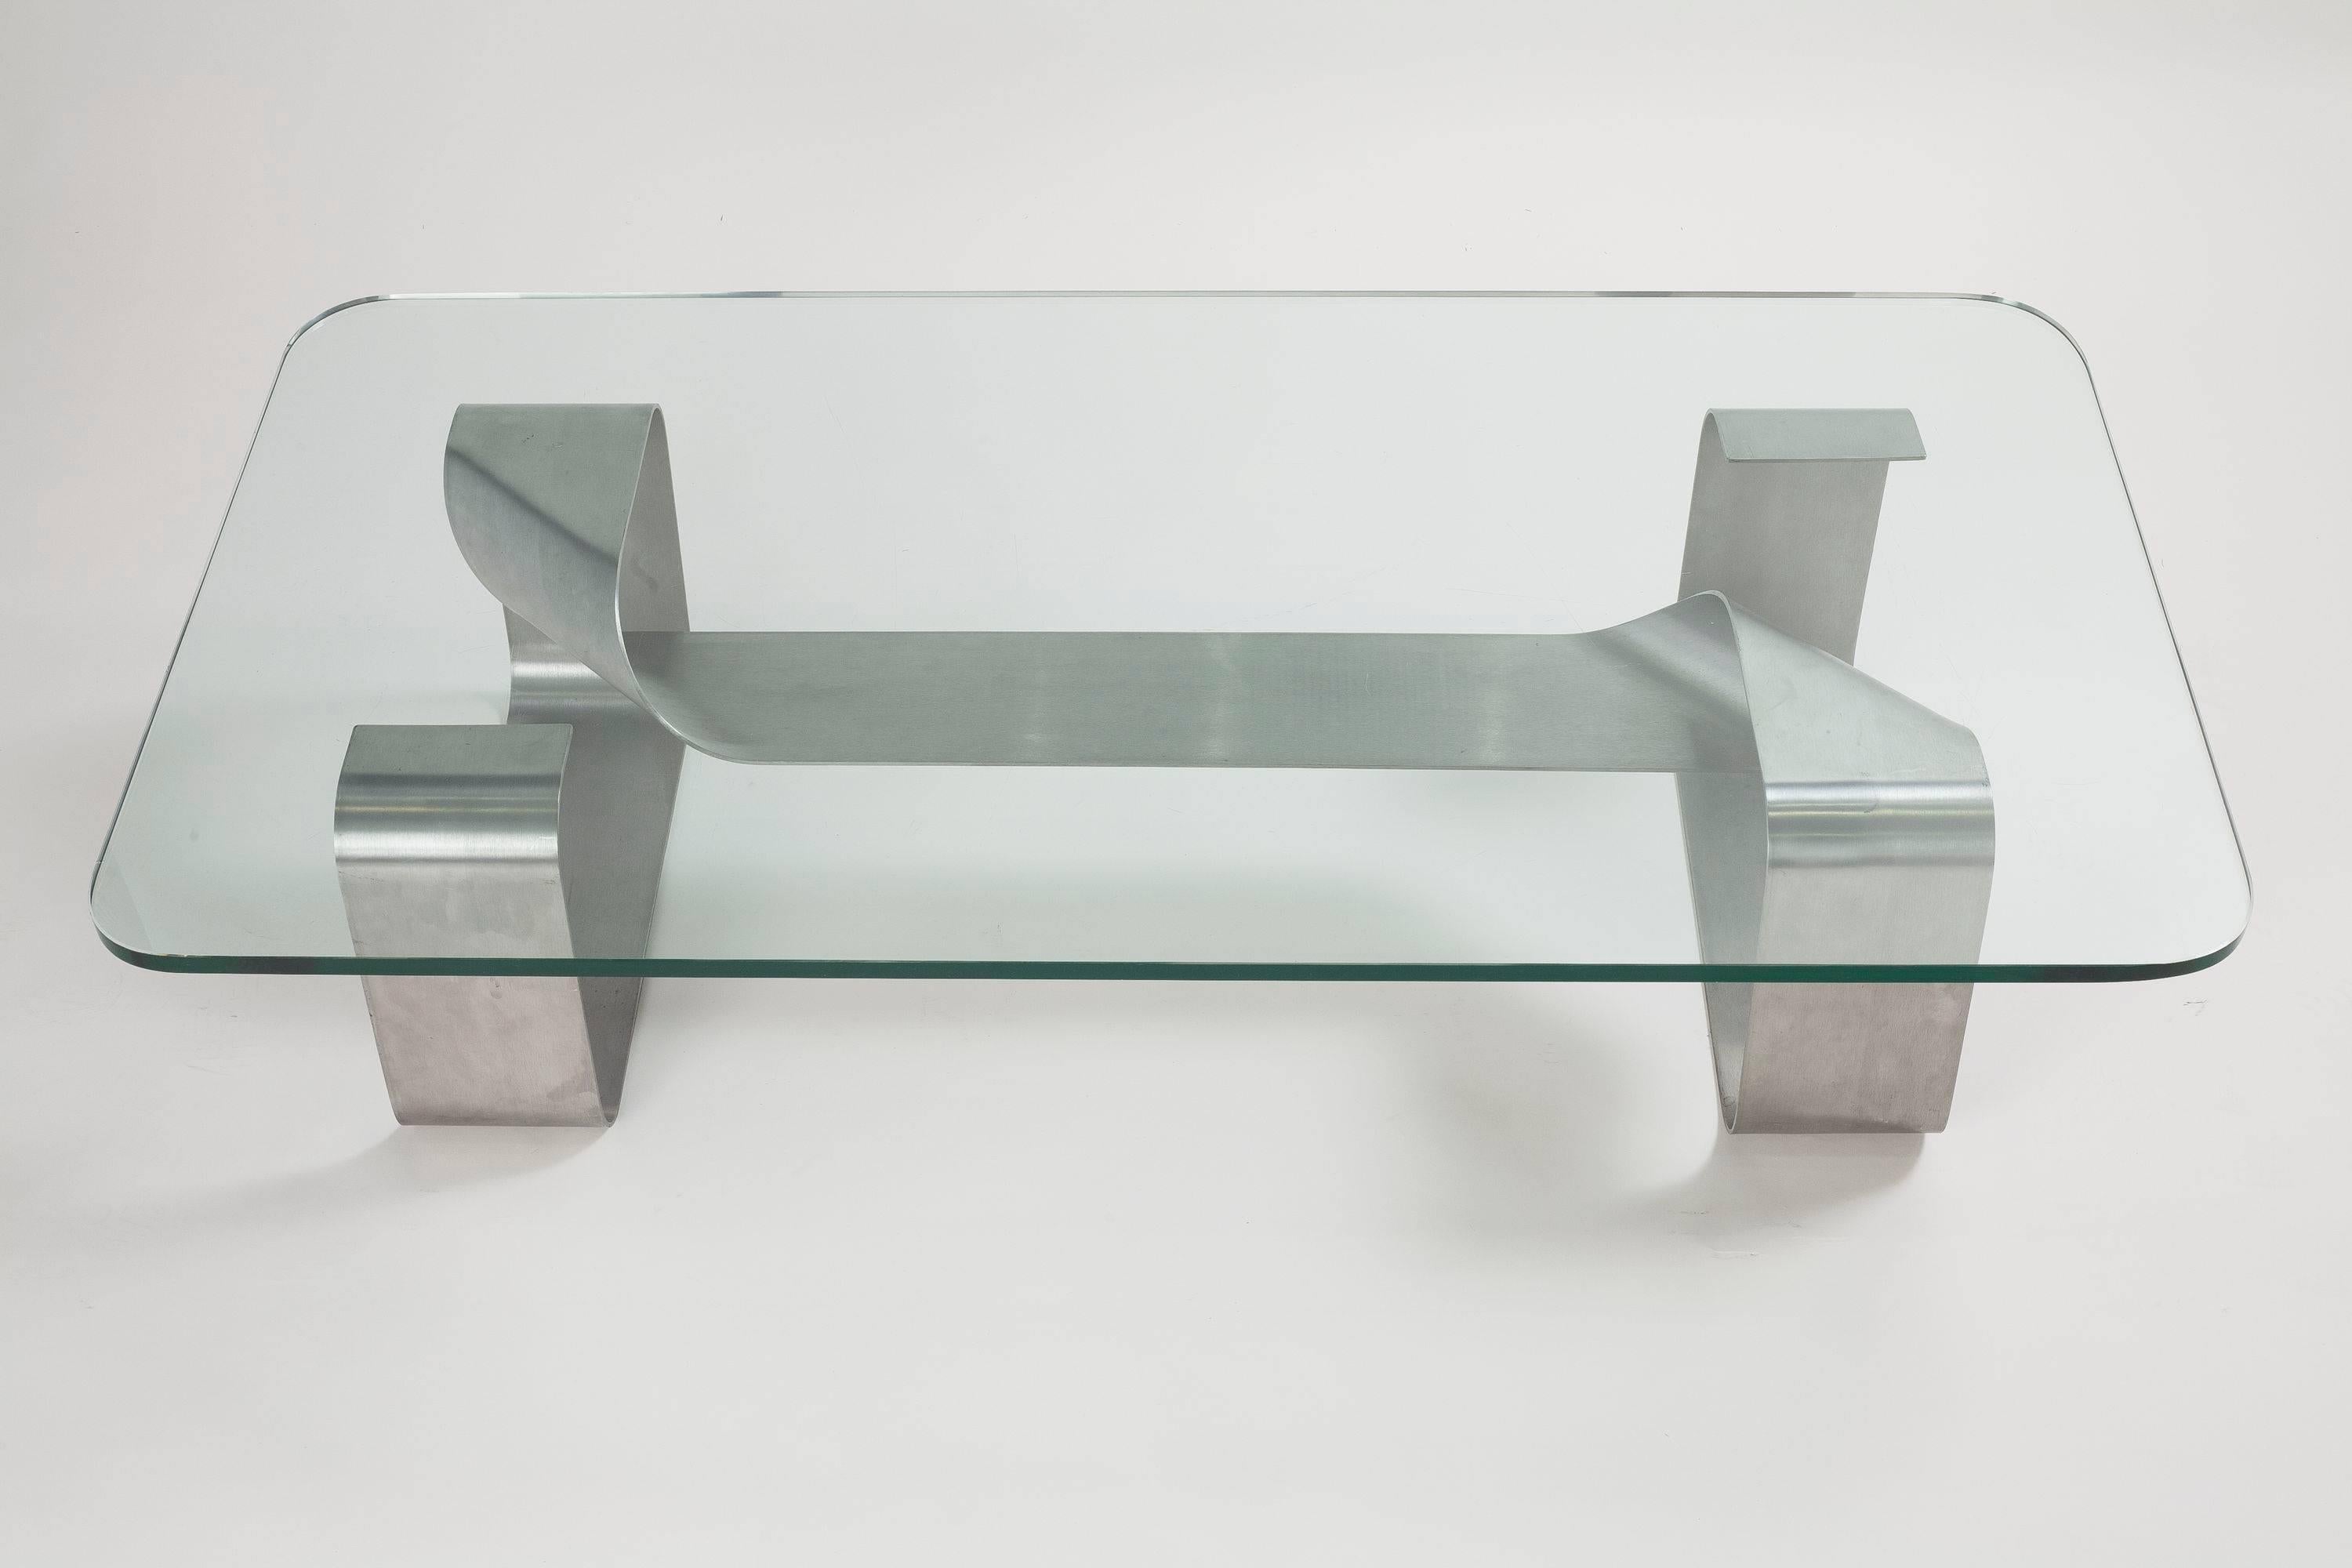 Steel base coffee table with a glass top, by Paul Legeard for DOM.